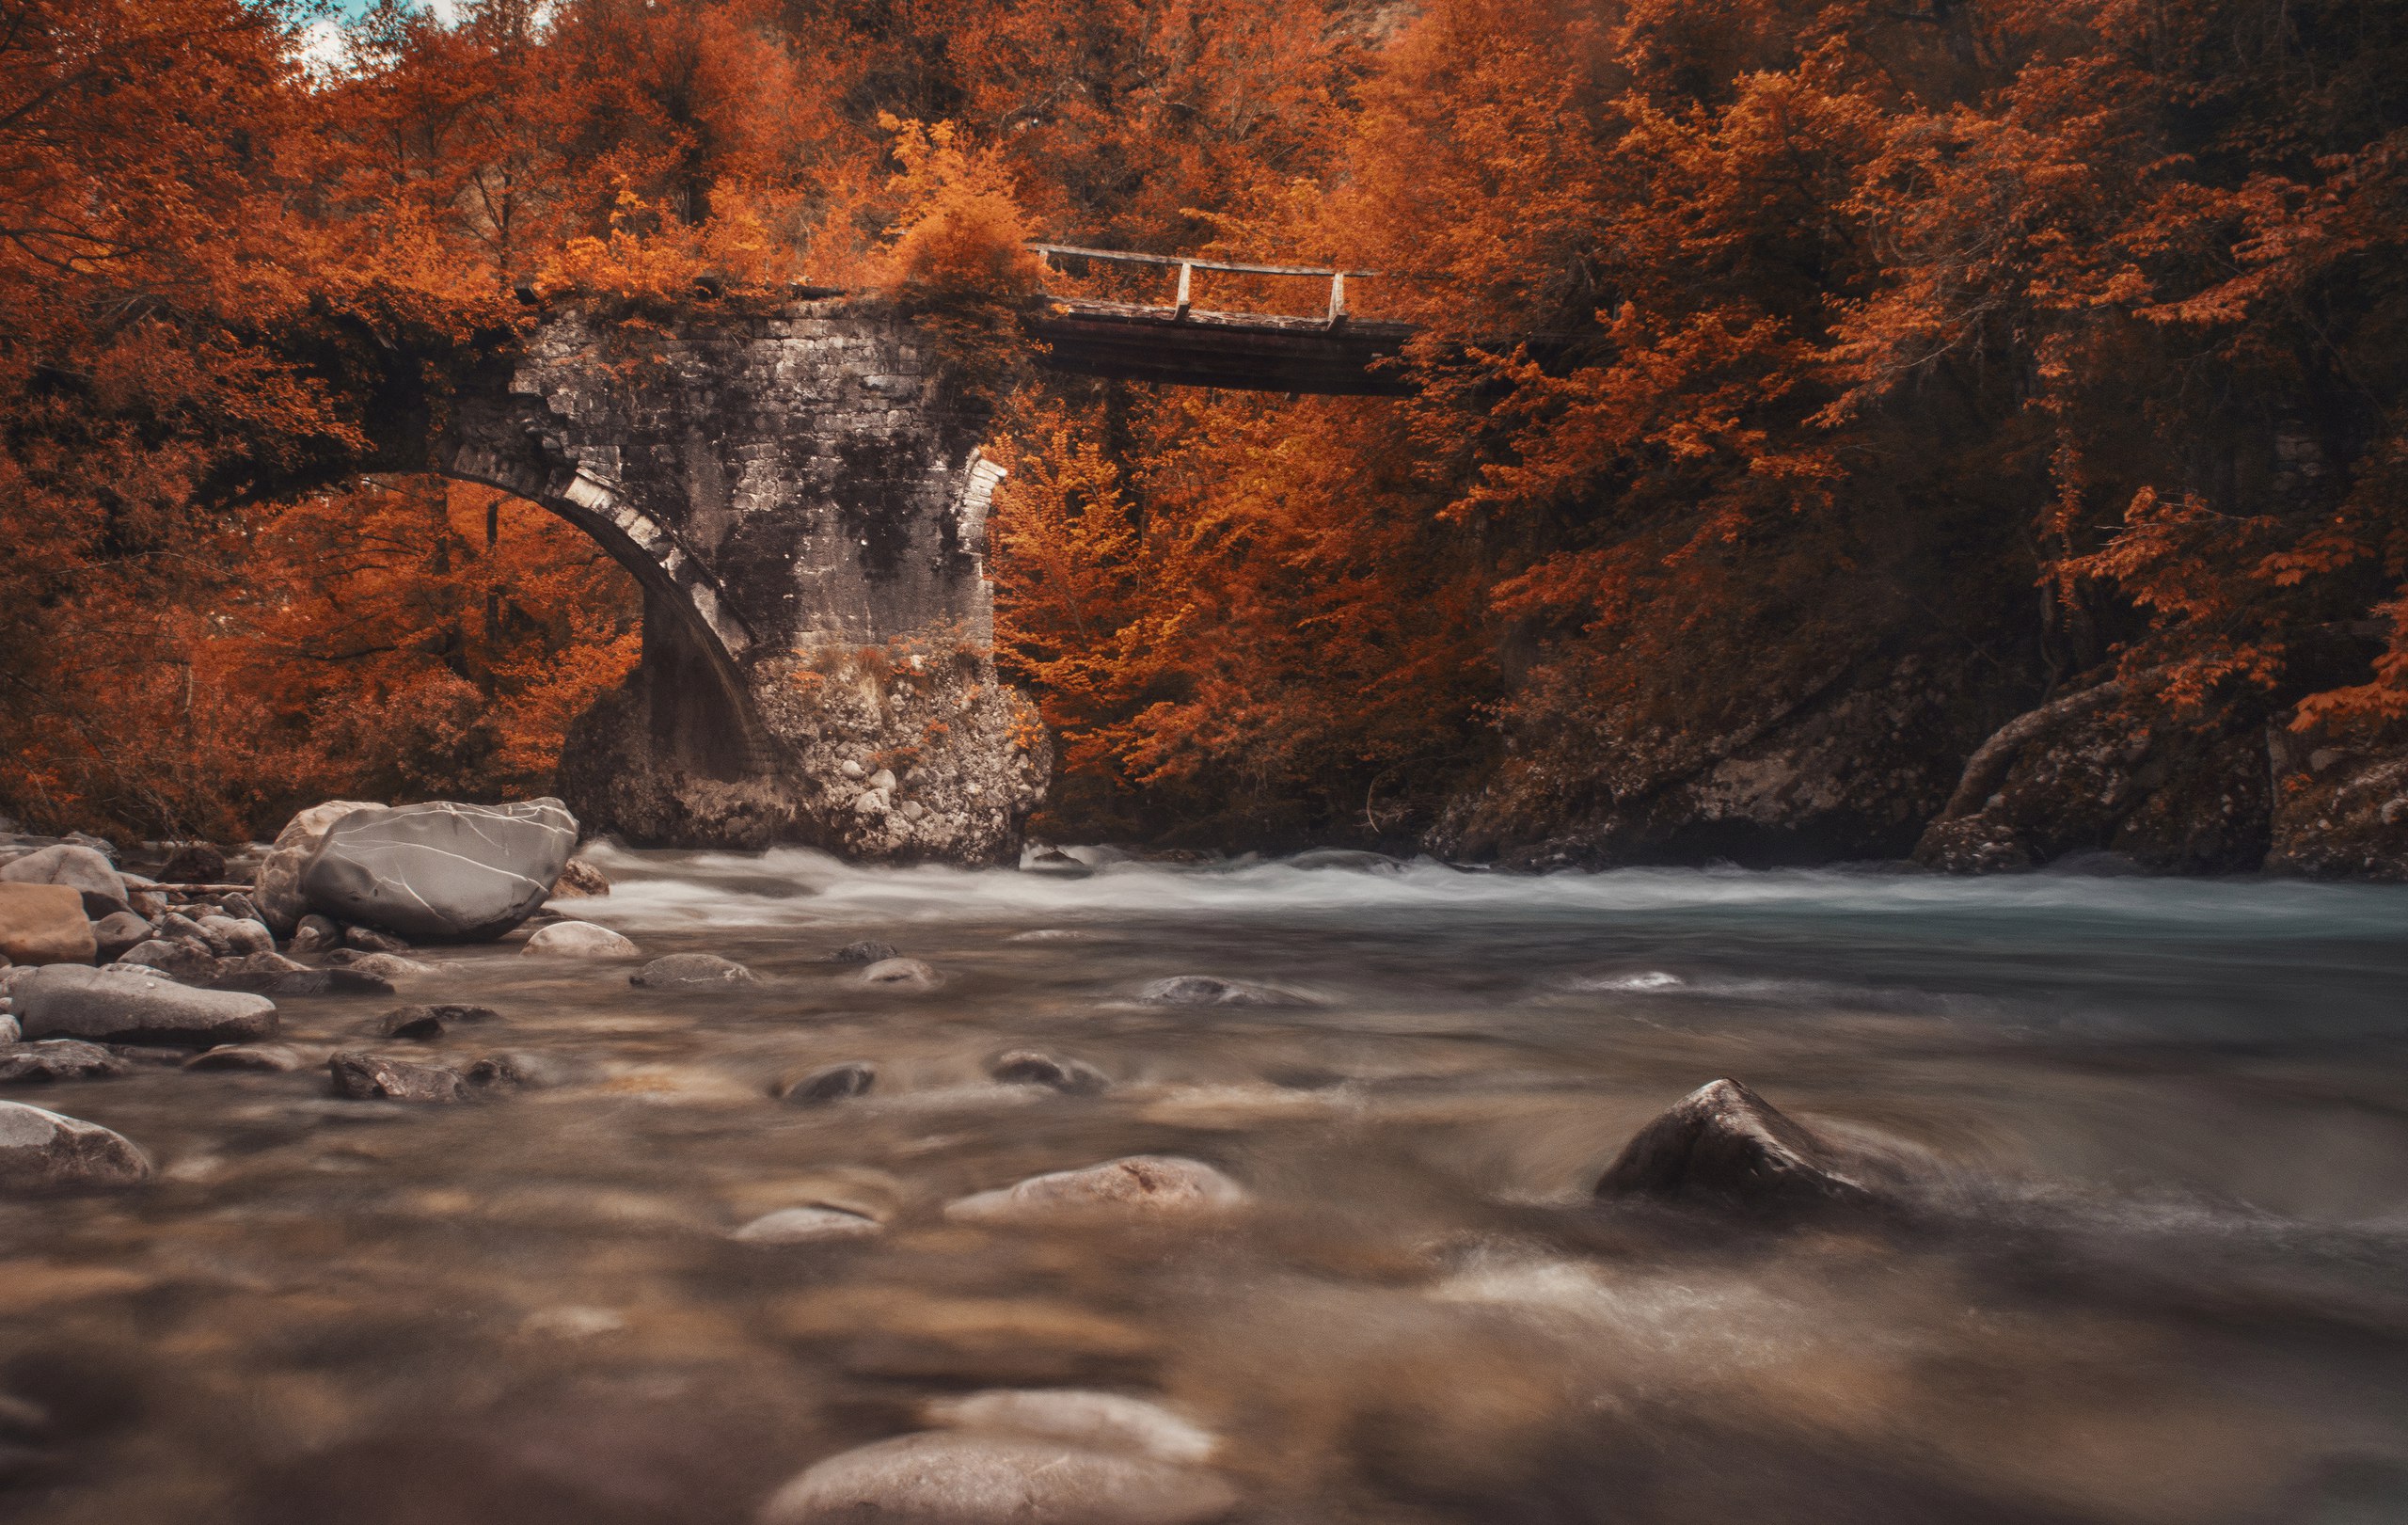 General 2560x1621 nature fall foliage trees water river bridge rocks forest outdoors